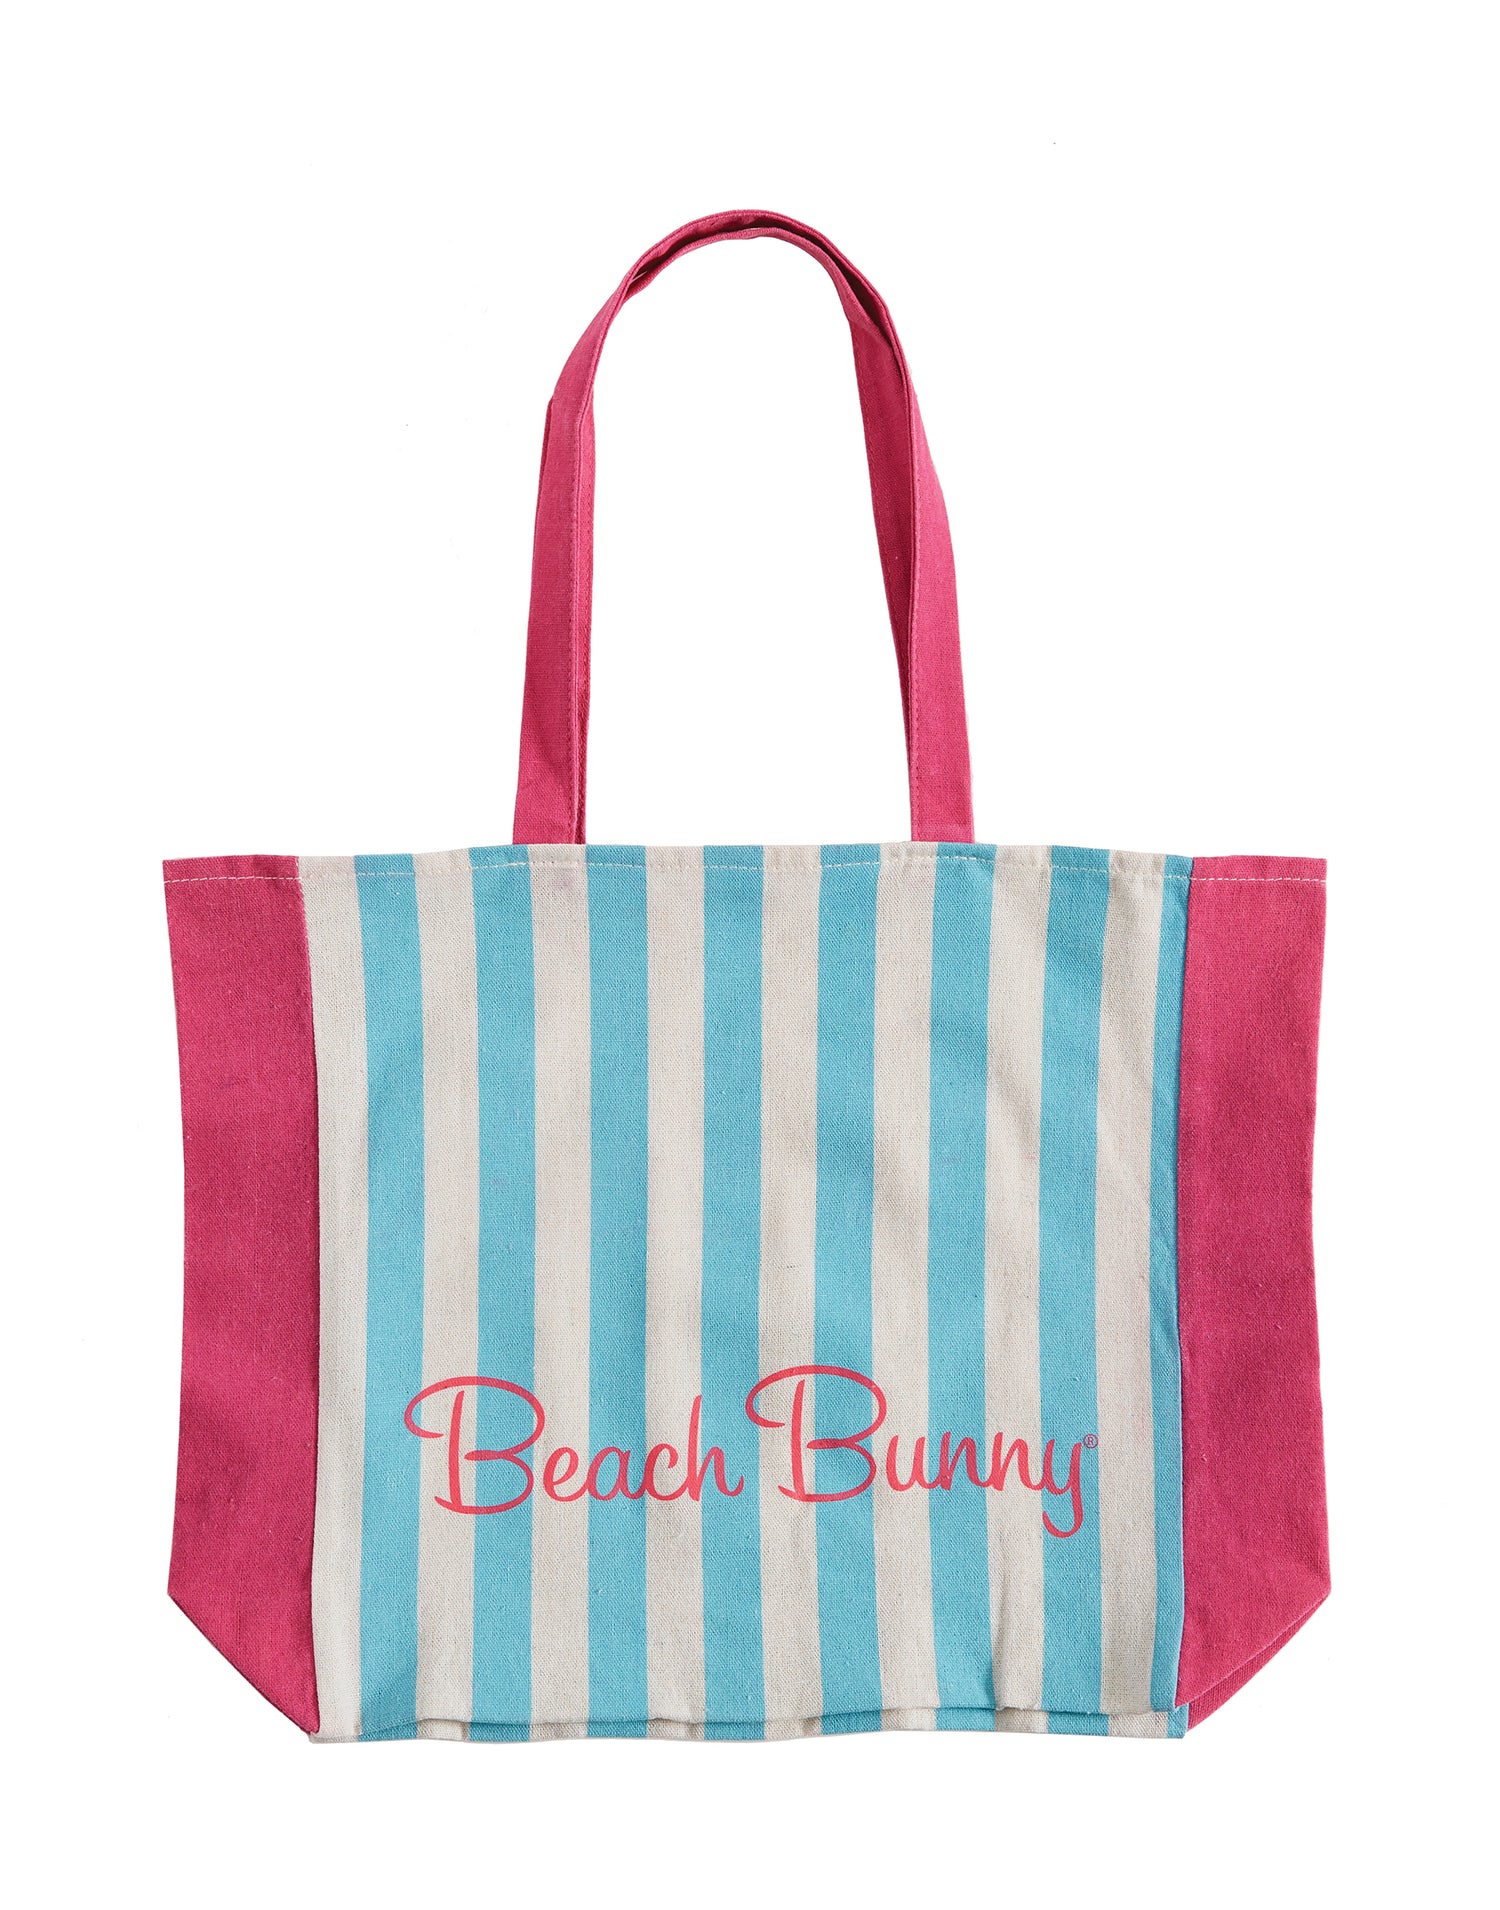 Beach Bunny Tote with Blue and Pink Stripes